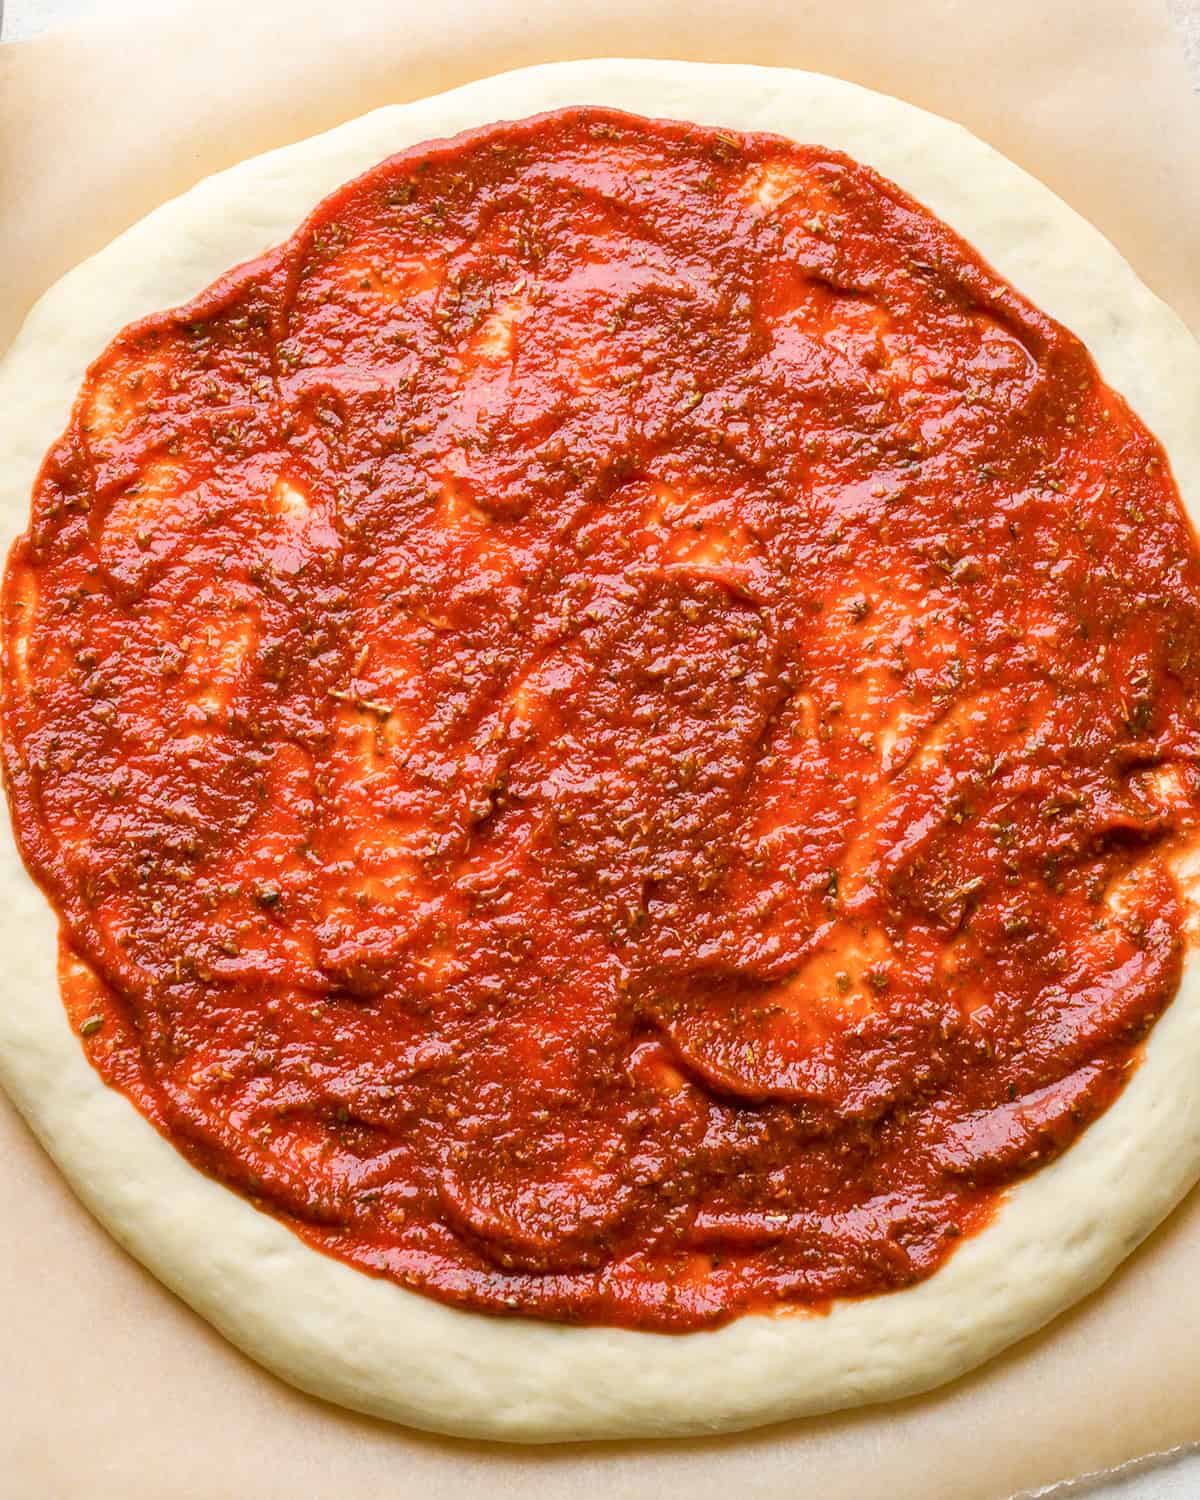 How to Make Pizza - sauce spread evenly on dough